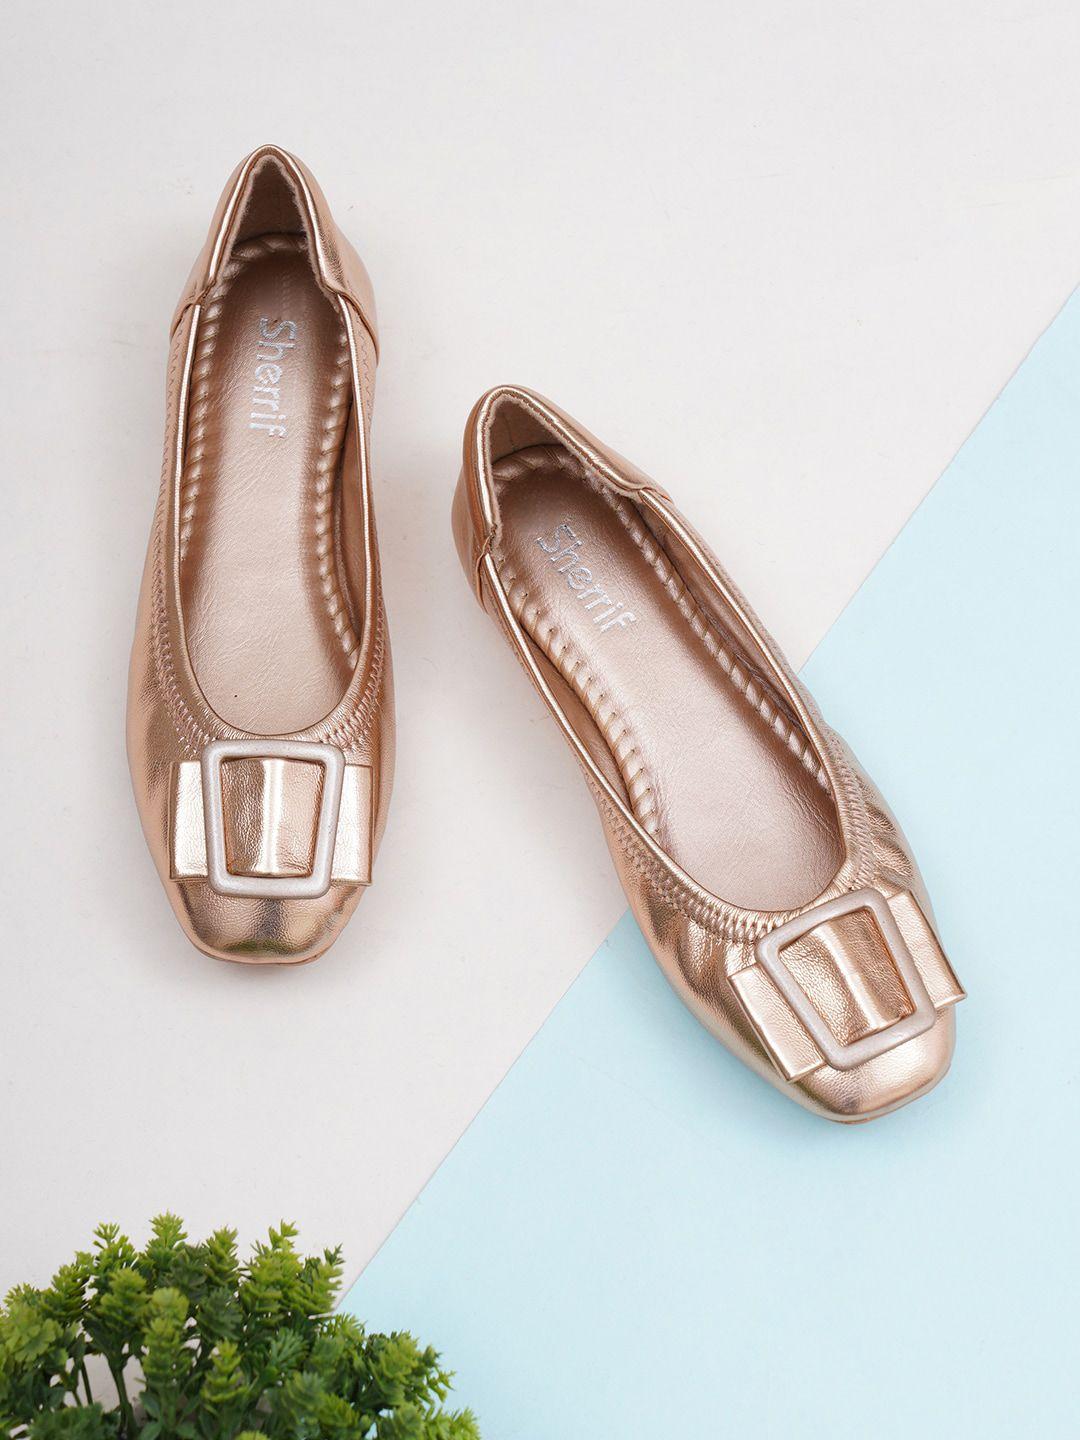 sherrif shoes women rose gold ballerinas with laser cuts flats